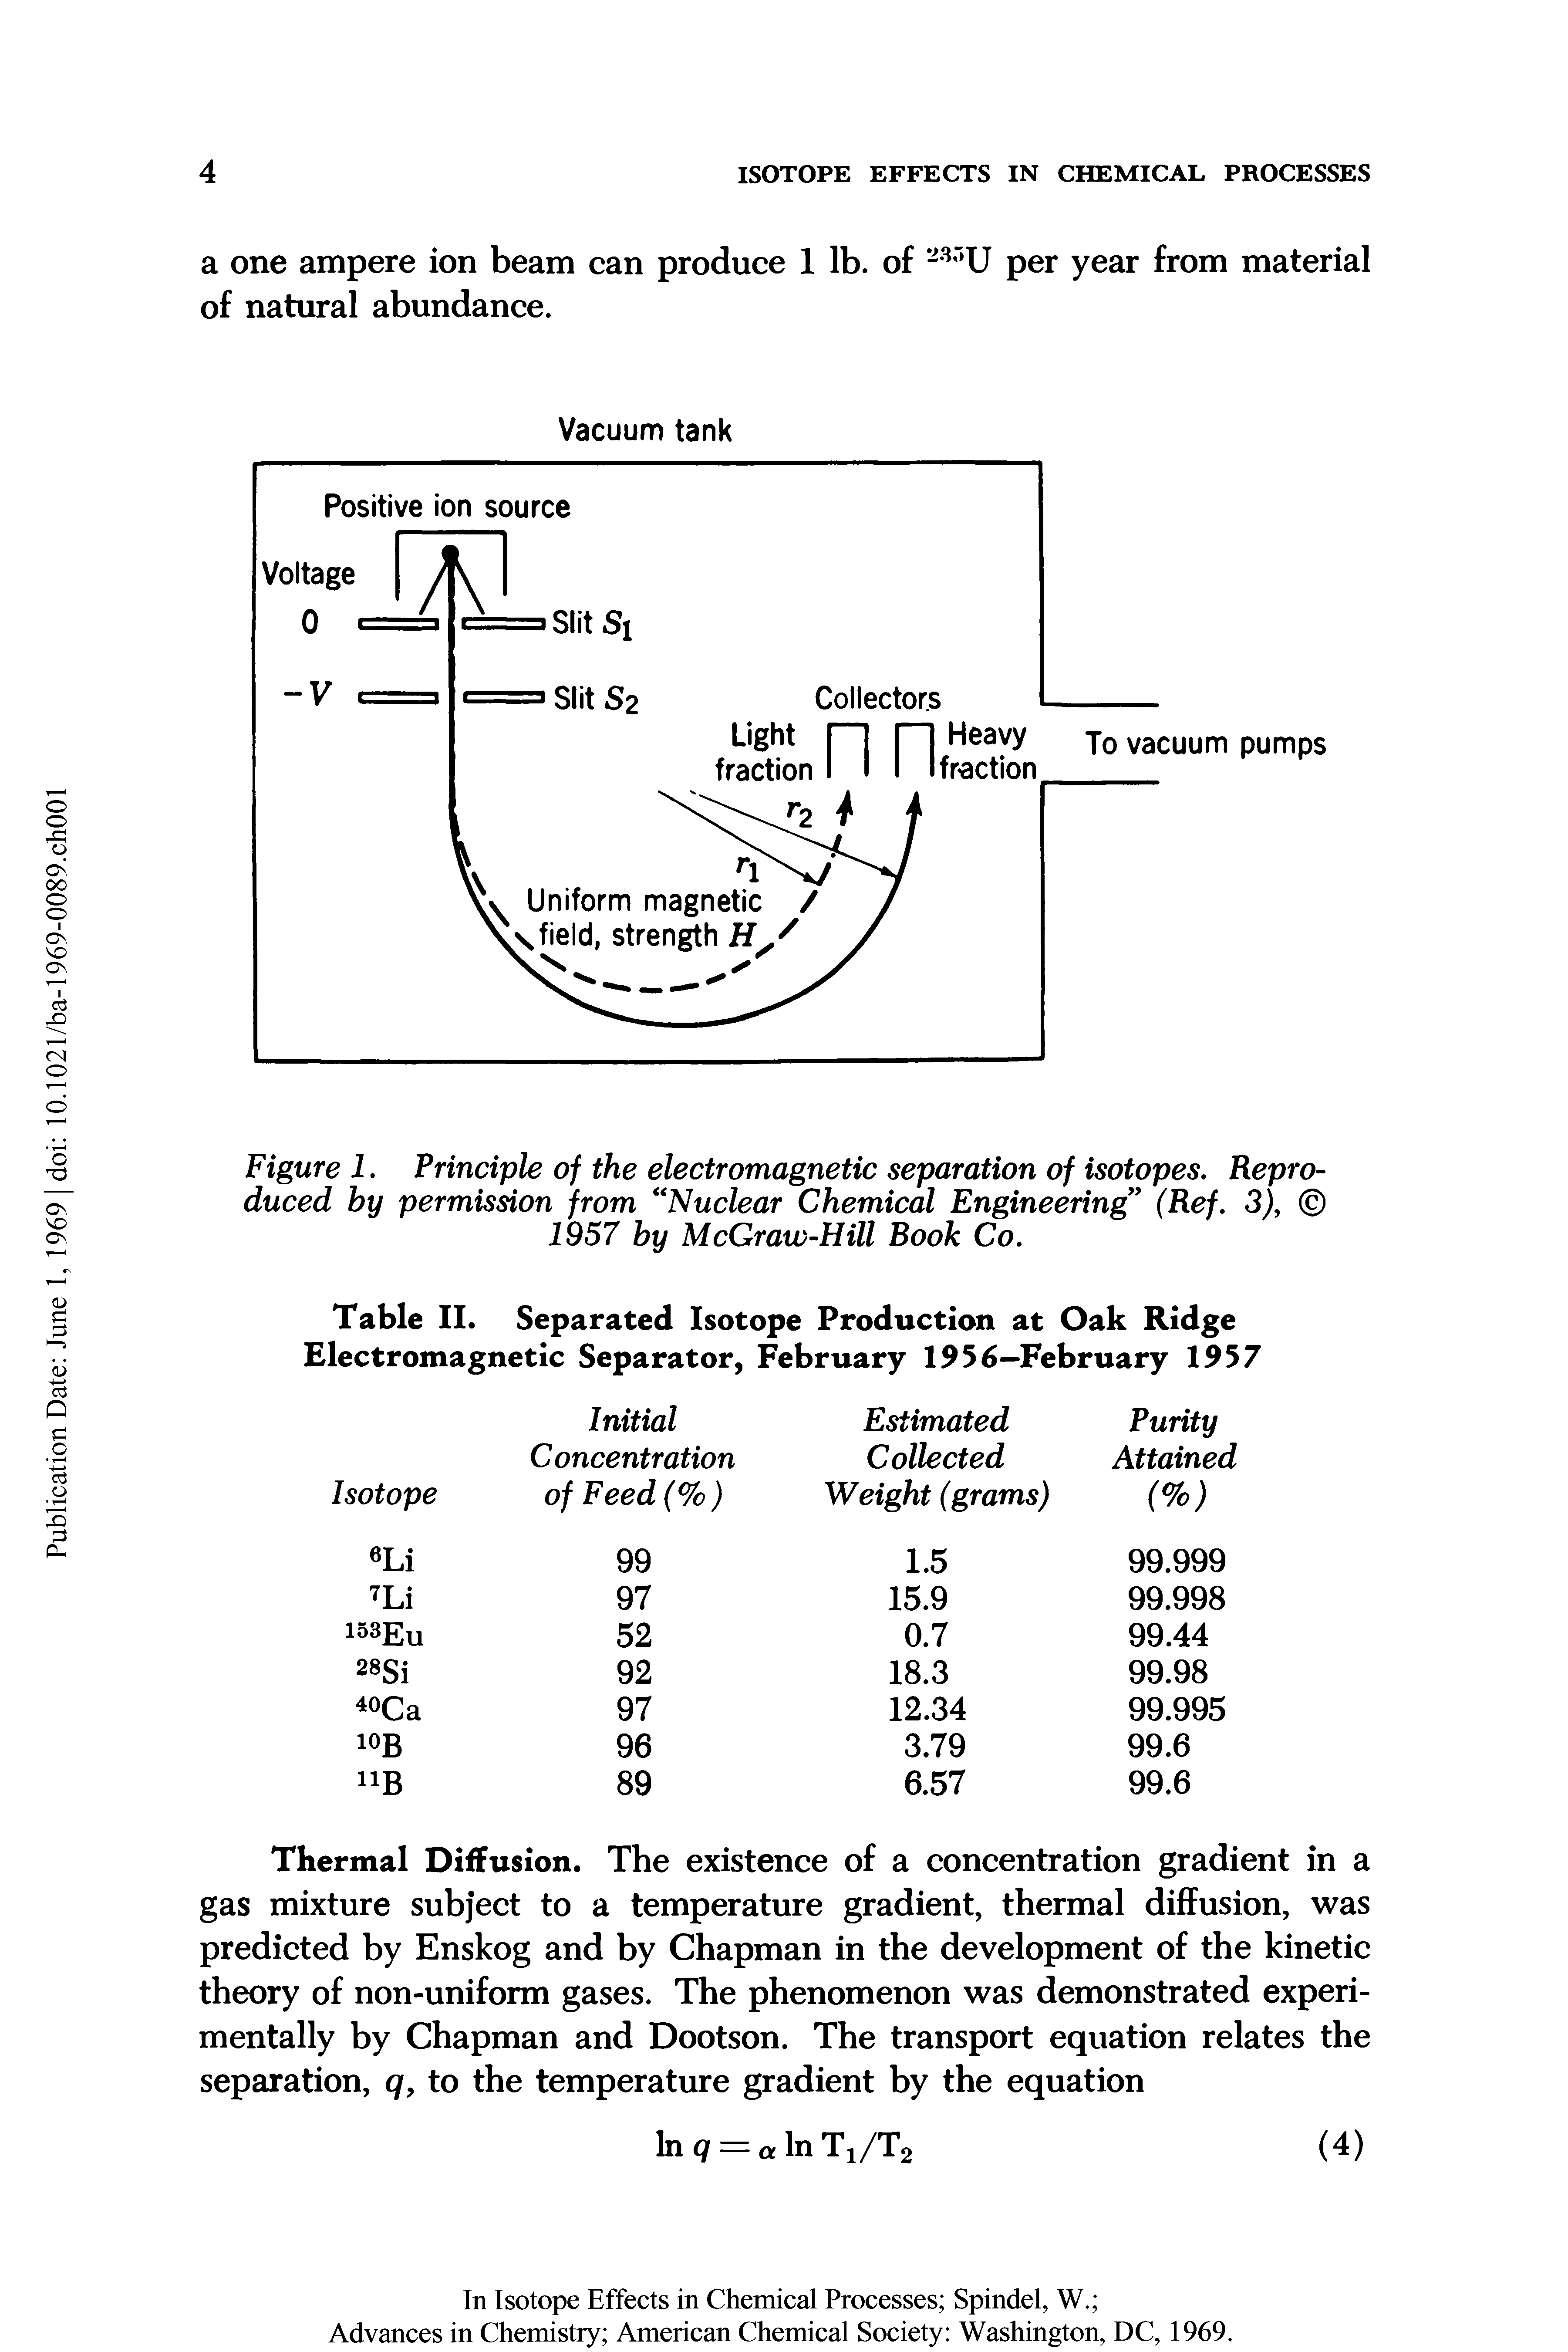 Figure 1. Principle of the electromagnetic separation of isotopes. Reproduced by permission from "Nuclear Chemical Engineering (Ref. 3), 1957 by McGraw-Hill Book Co.